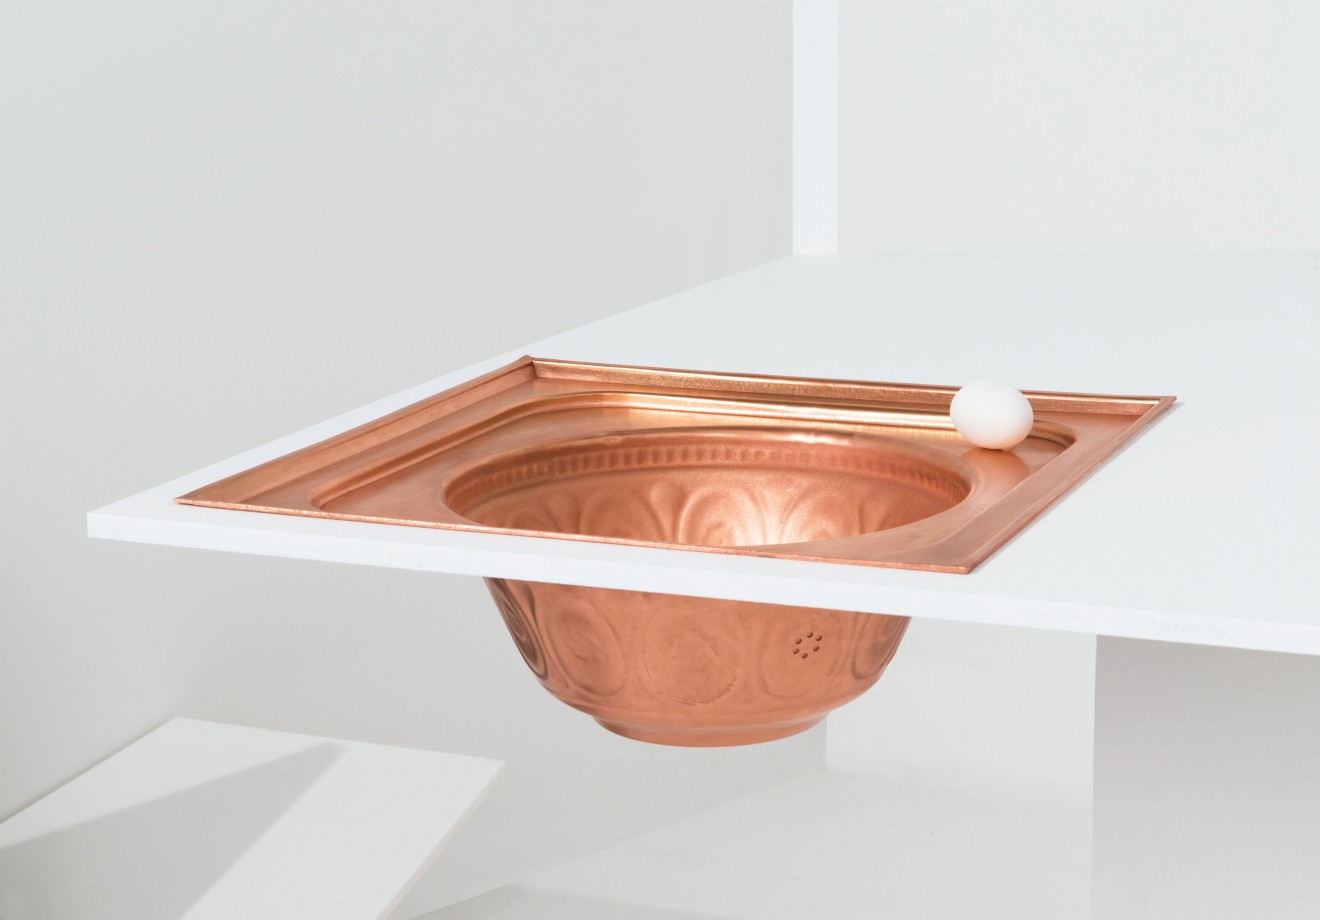 Kathleen Reilly  Mixing bowl 2018  Copper